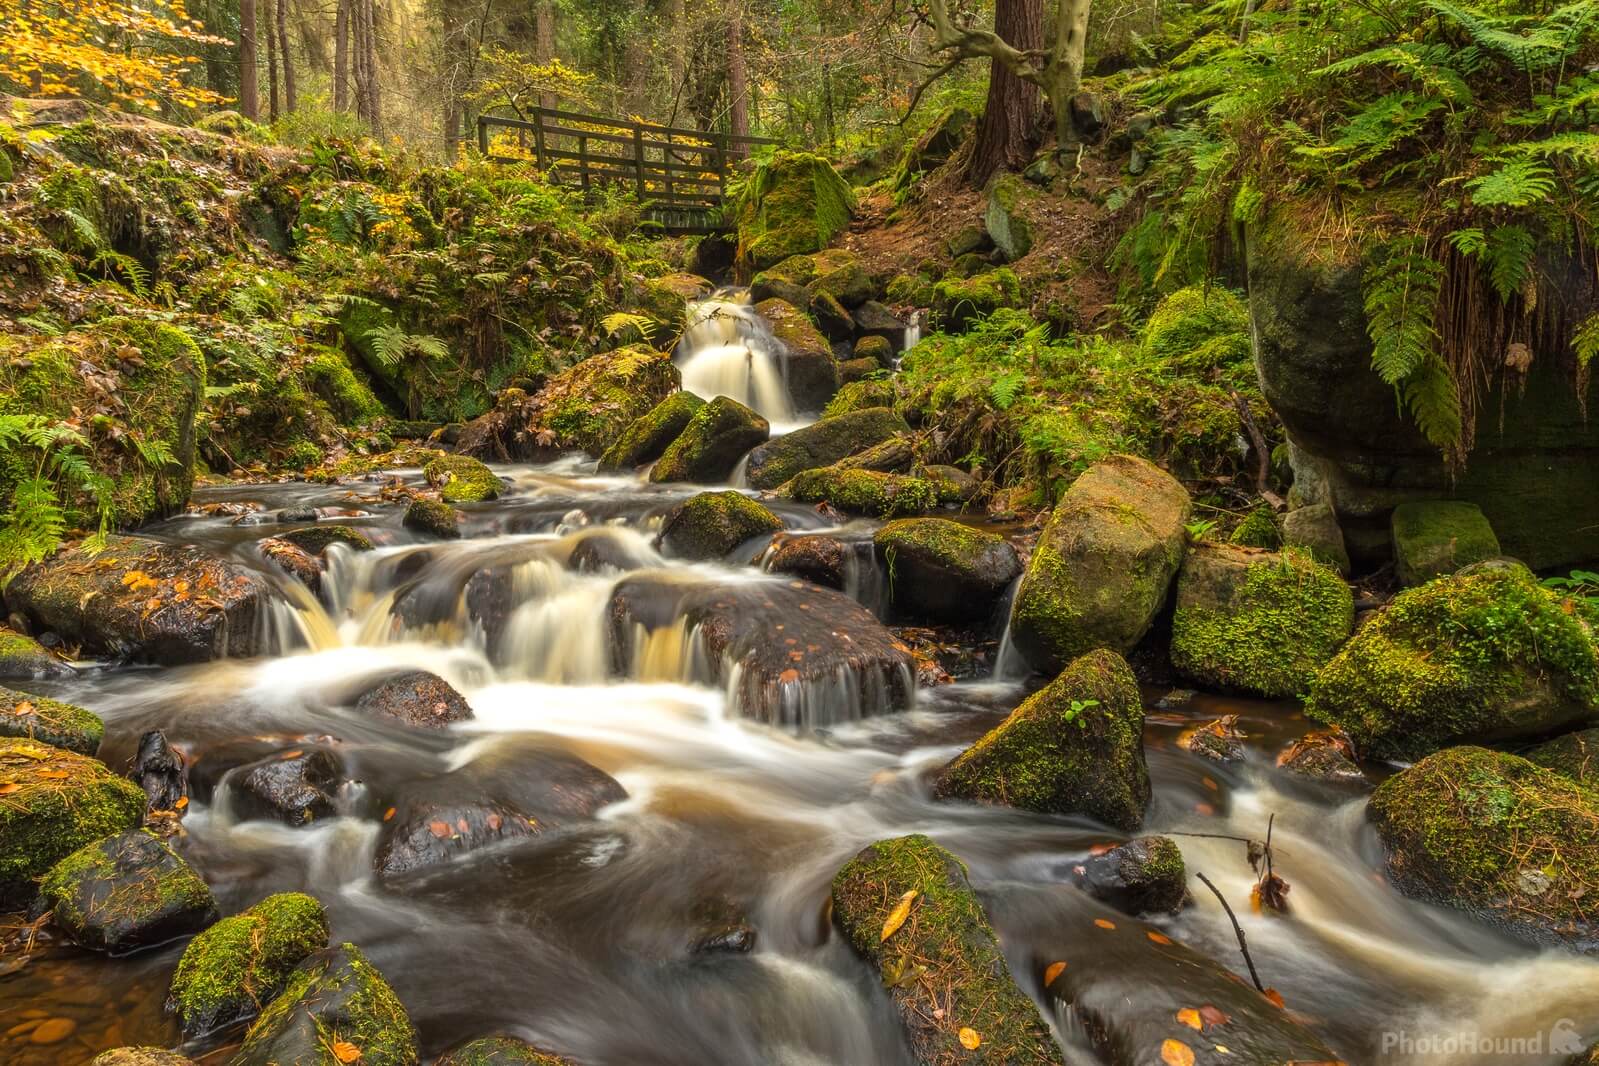 Image of Wyming Brook by Andy Killingbeck